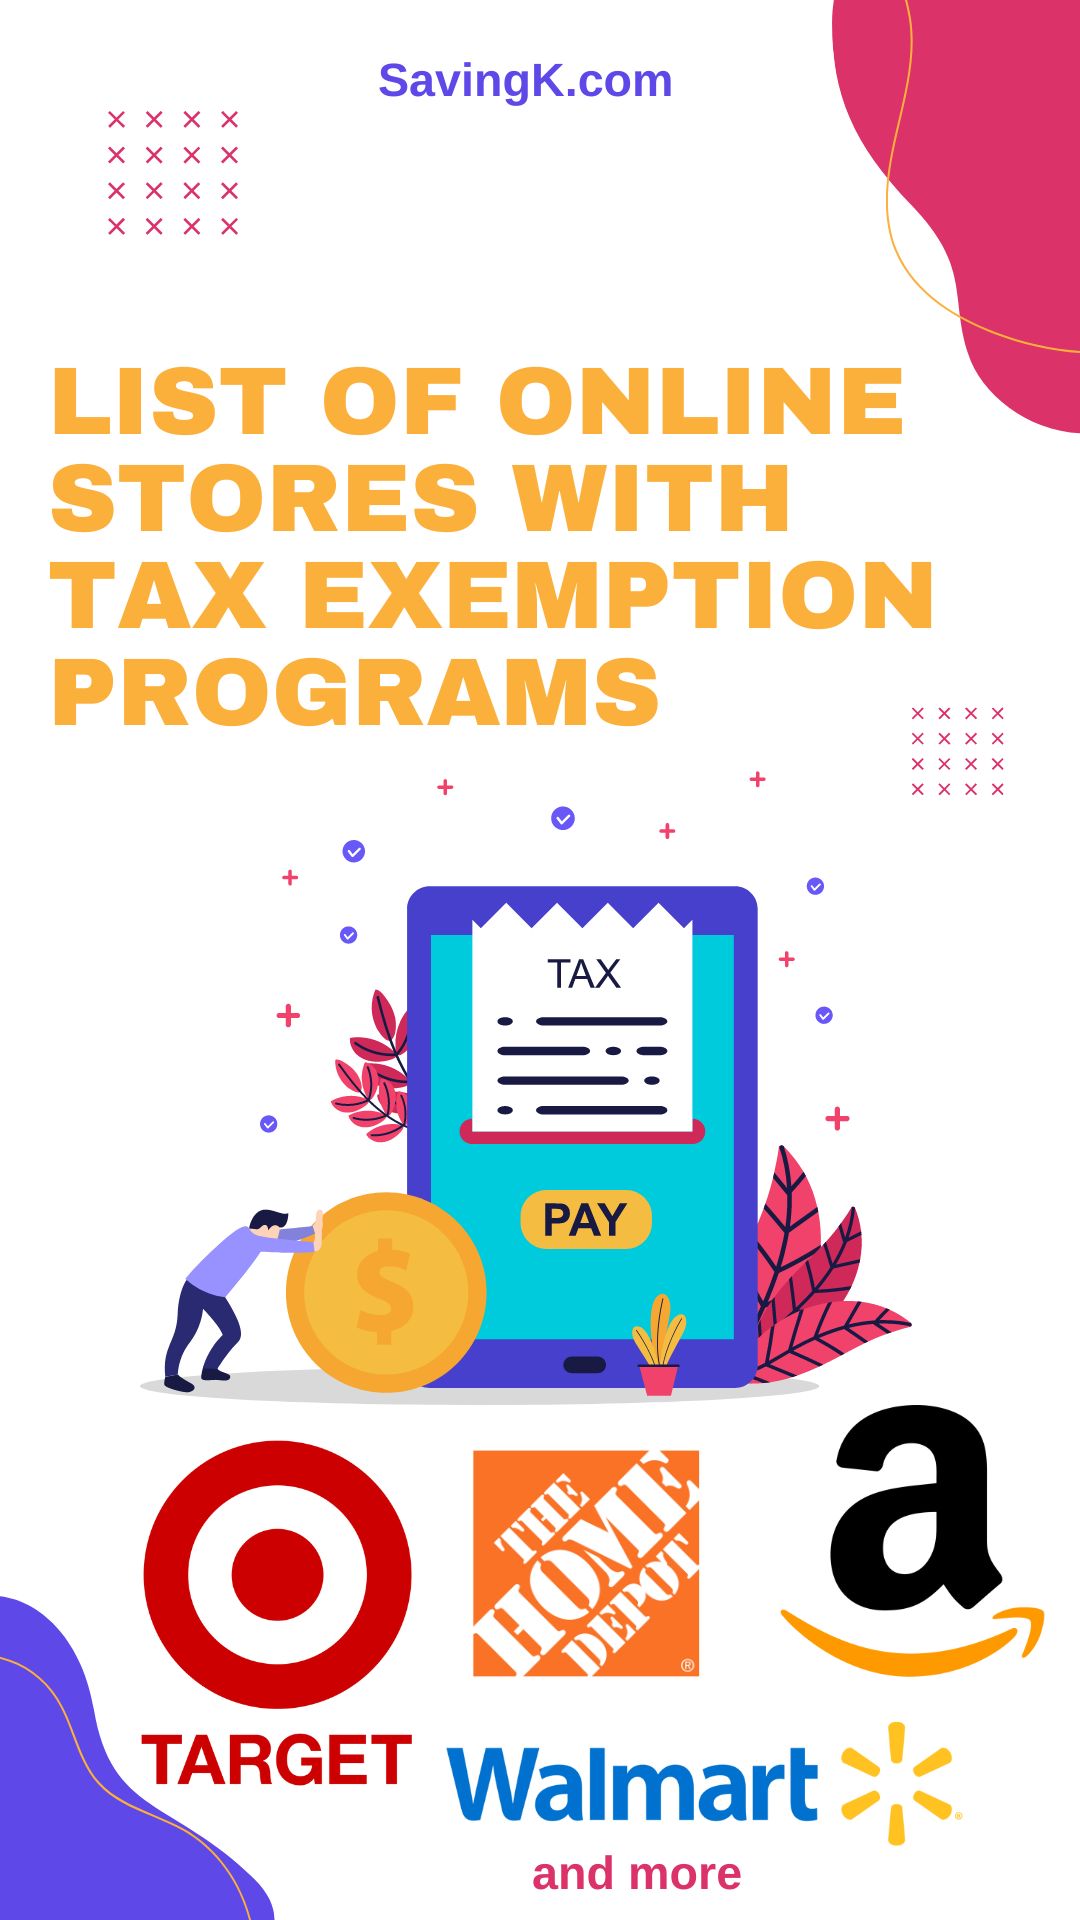 List of Online Stores With Tax Exemption Programs